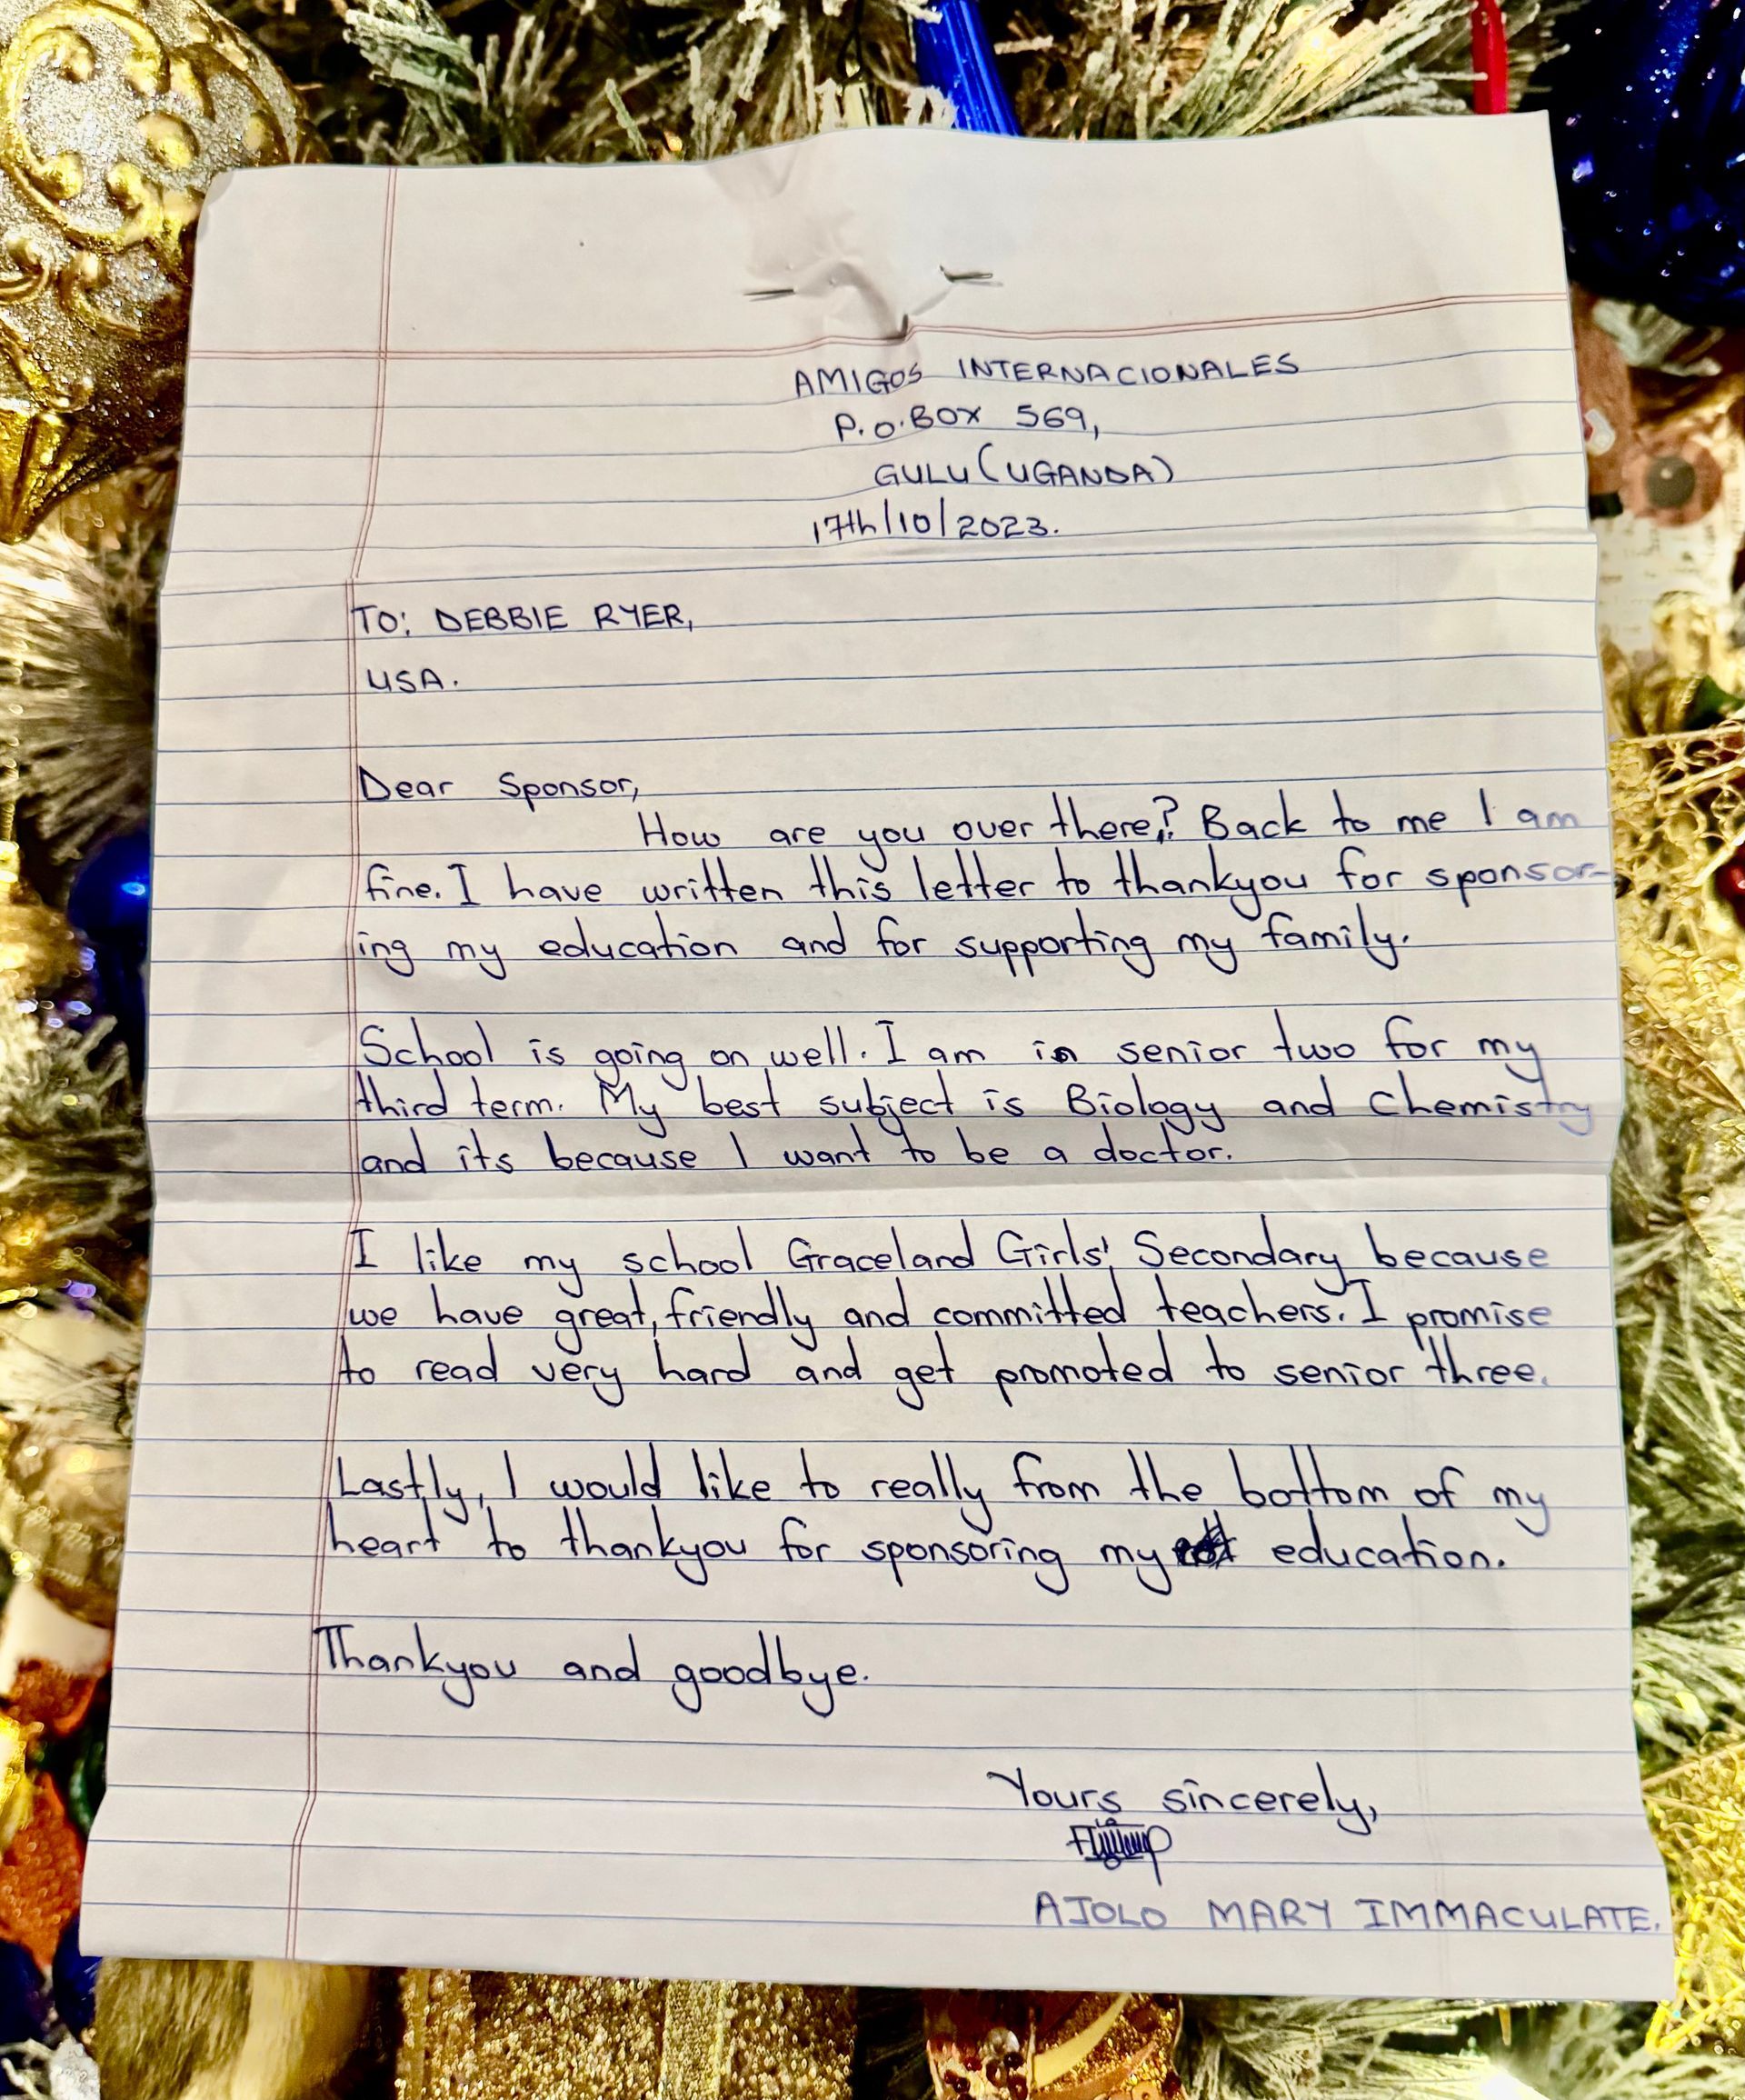 Mary's letter to her sponsor 